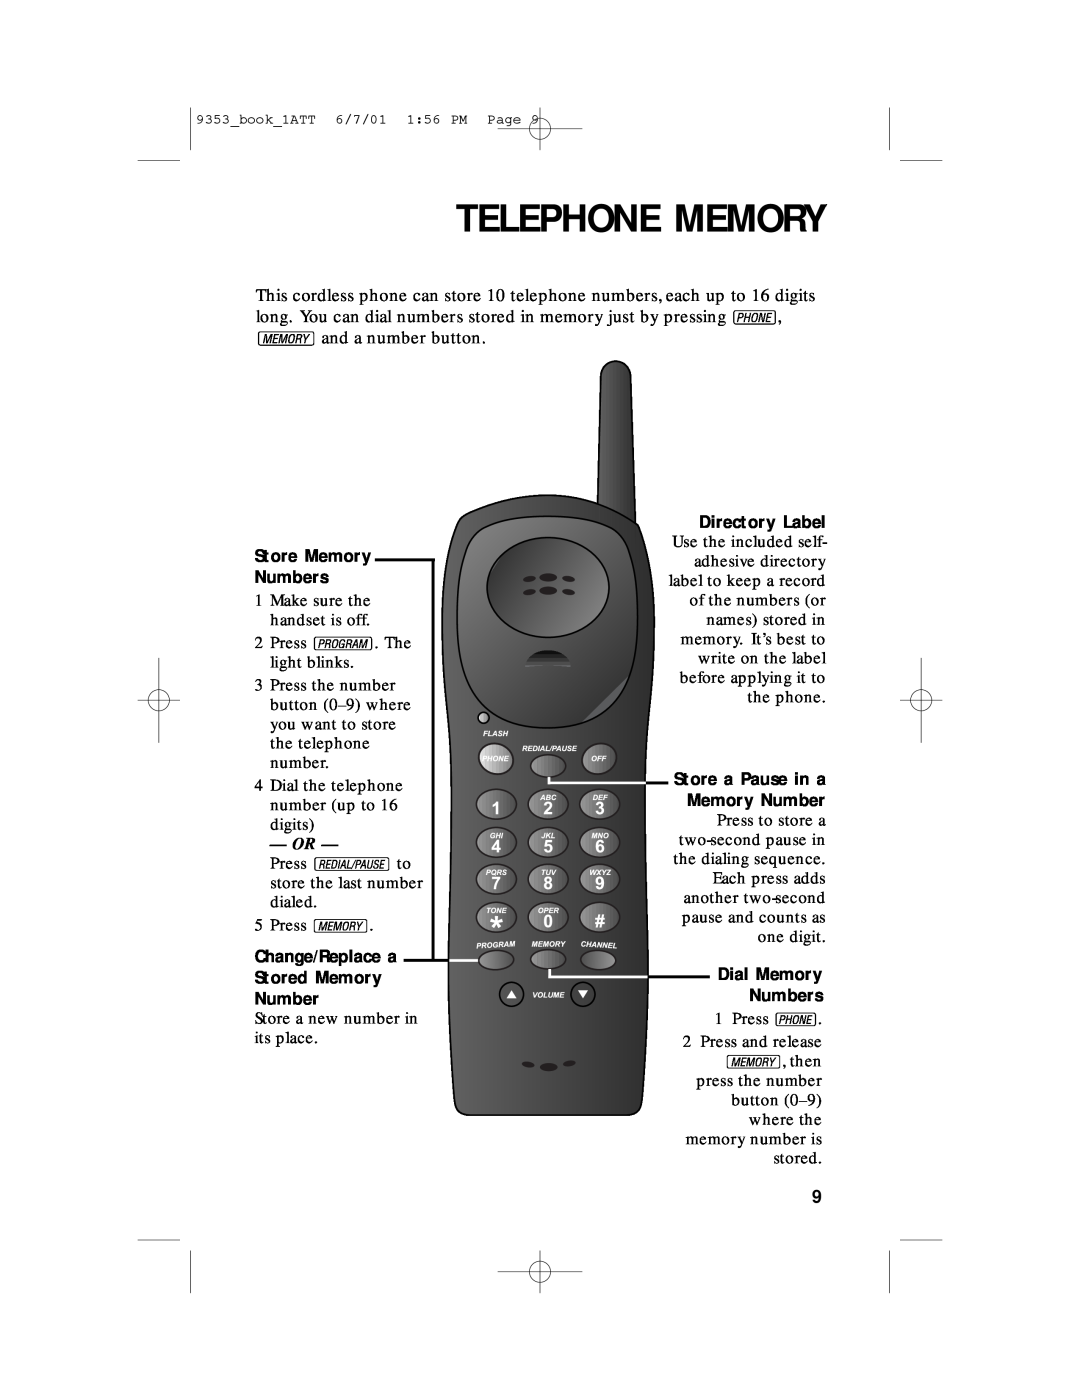 AT&T 9353 Telephone Memory, Store Memory Numbers, Stored Memory Number, Directory Label, Store a Pause in a Memory Number 